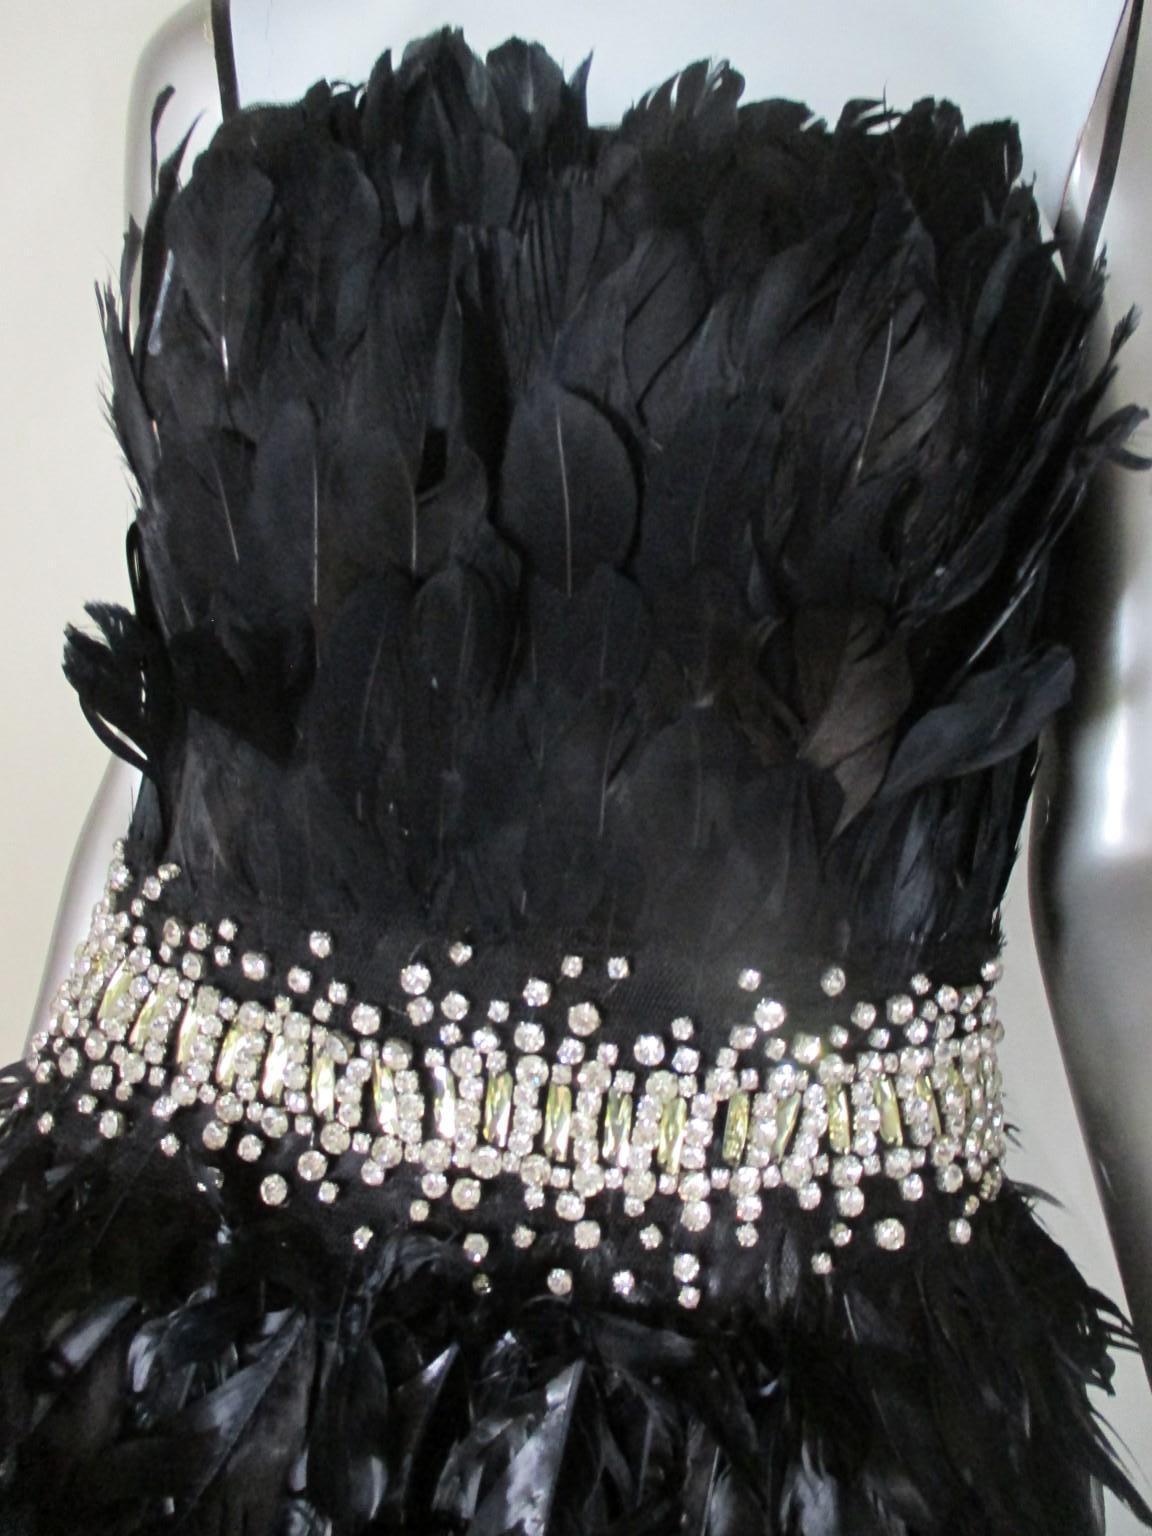 This is a Vintage black evening gown with inside lining short dress. 
This exquisite gown is embroided with black iridescent feathers and silver color stones.
The dress has a zip and hook-and-eye side closure. 
Its worn and has some wear.
There are